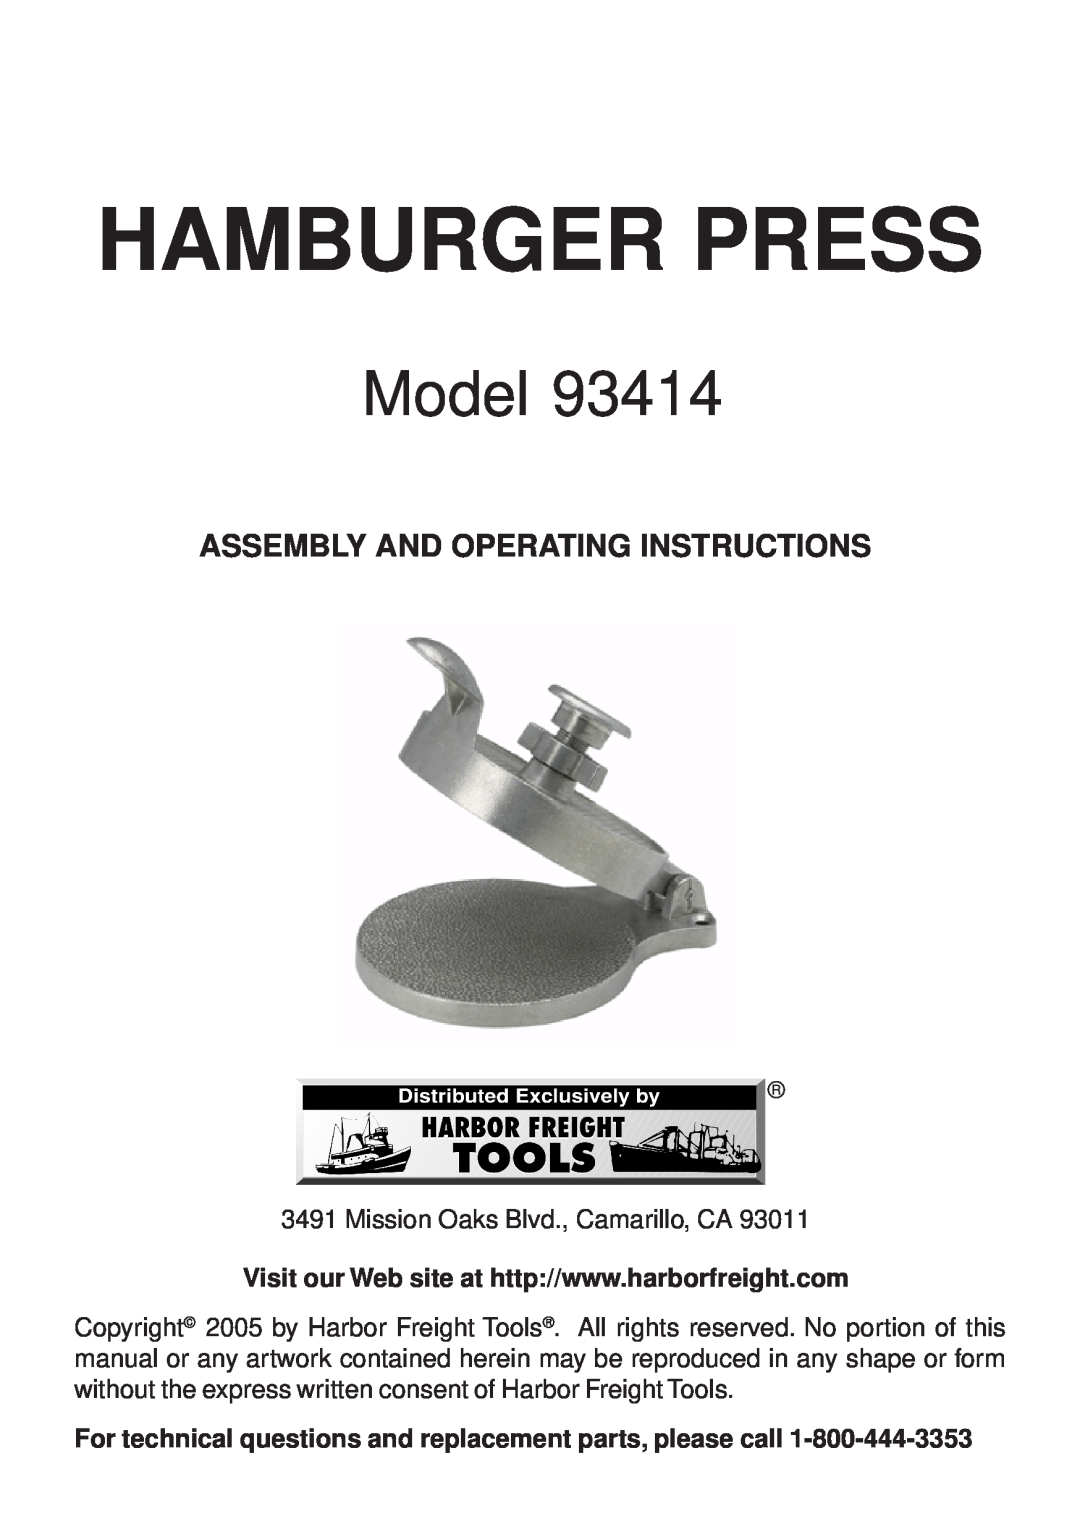 Harbor Freight Tools 93414 operating instructions Assembly And Operating Instructions, Hamburger Press, Model 